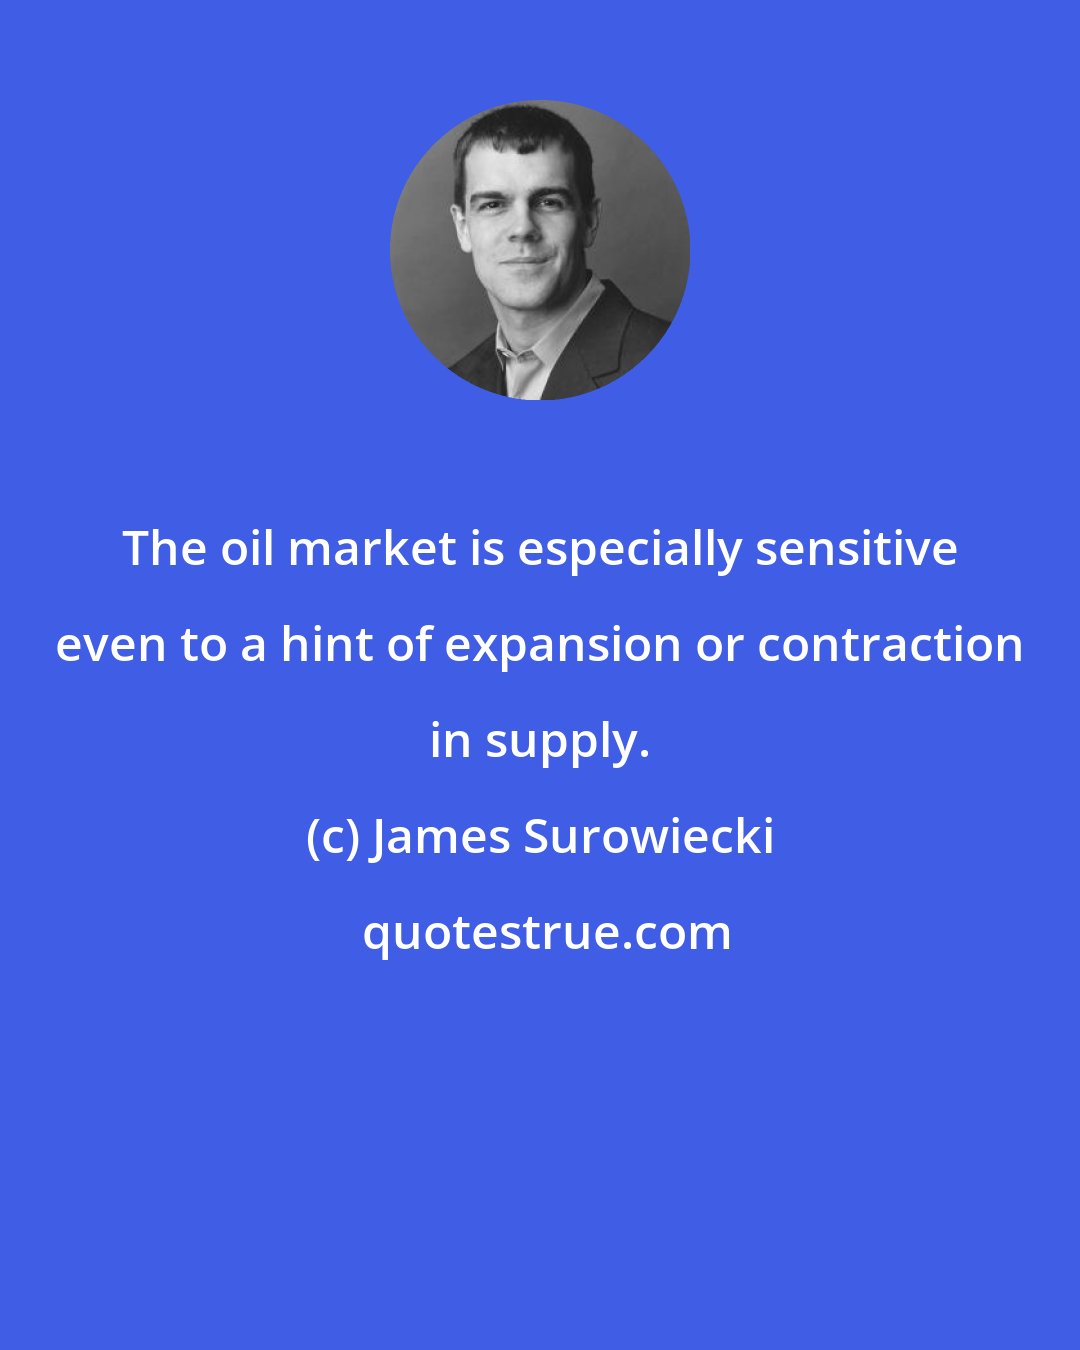 James Surowiecki: The oil market is especially sensitive even to a hint of expansion or contraction in supply.